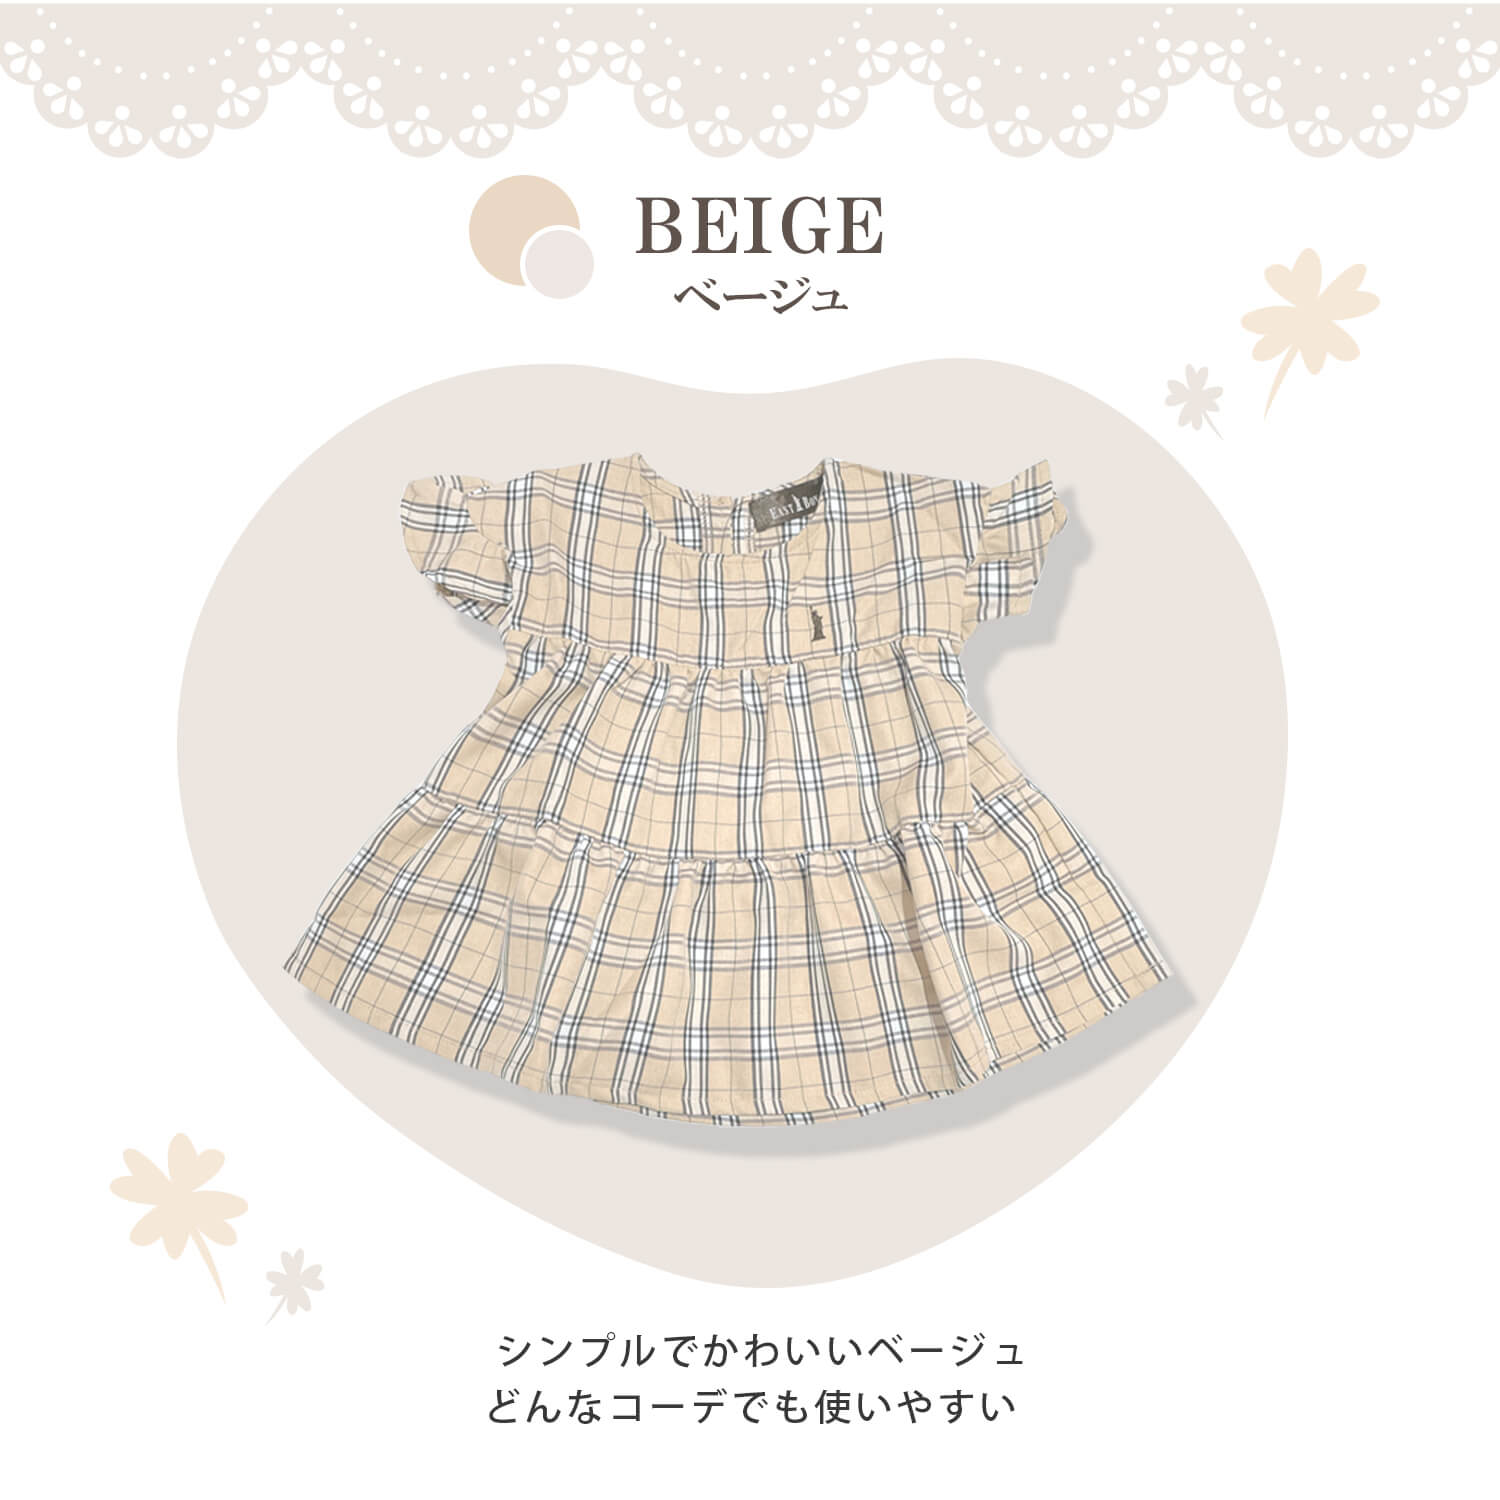 EASTBOY イーストボーイ ワンピース 半袖 キッズ チュニック チェック ベビー服 子供服  80 90 95 100 110 120 130 karlas｜outfit-style｜02